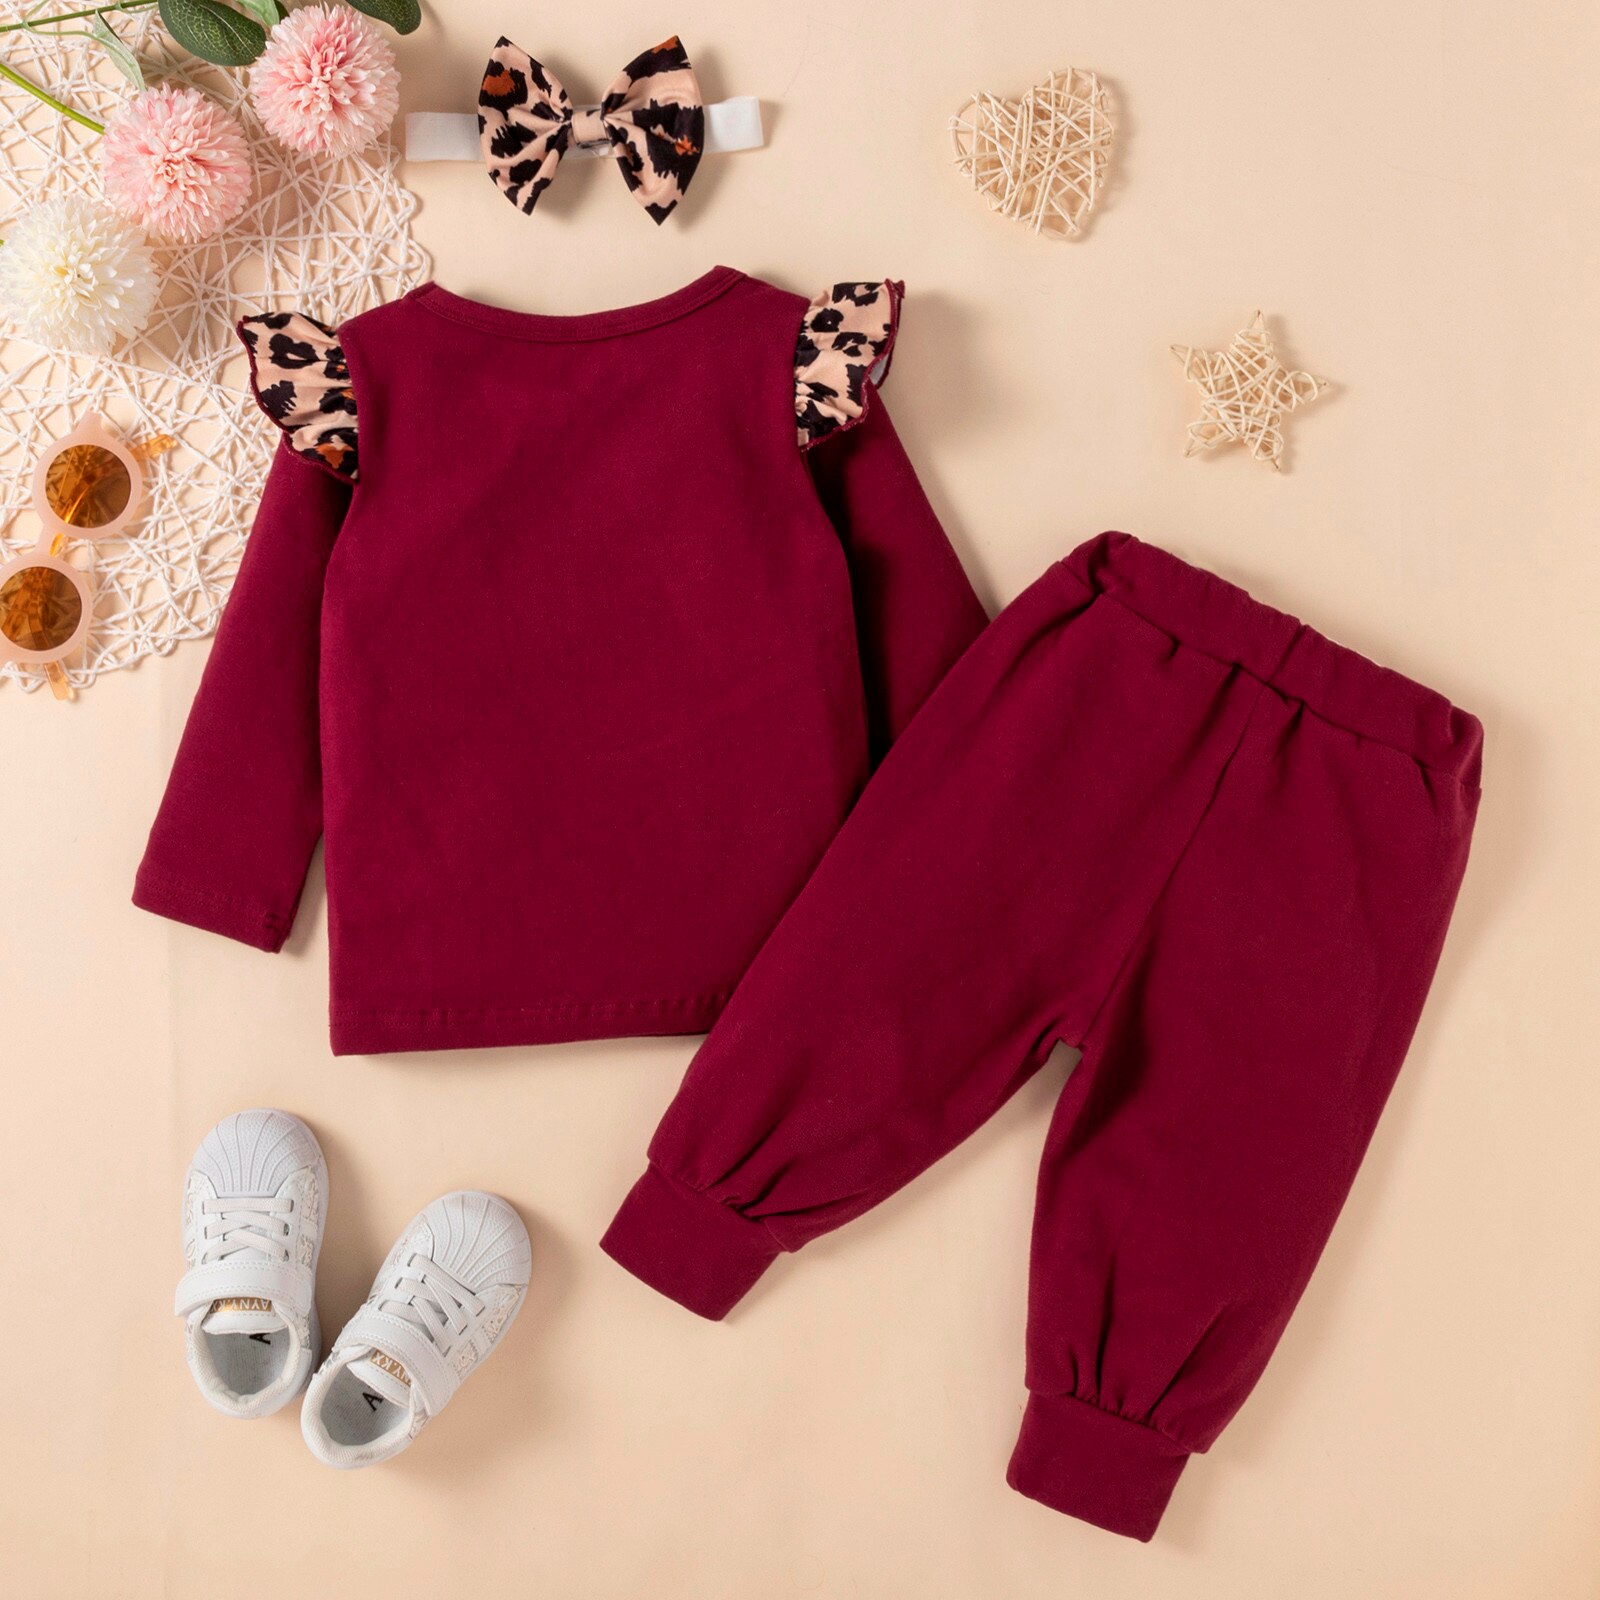 New-Toddler-Infant-Baby-Girls-Clothes-Letter-Leopard-Print-Top-Bow-Pants-Set-Baby-Outfits-Fall-3